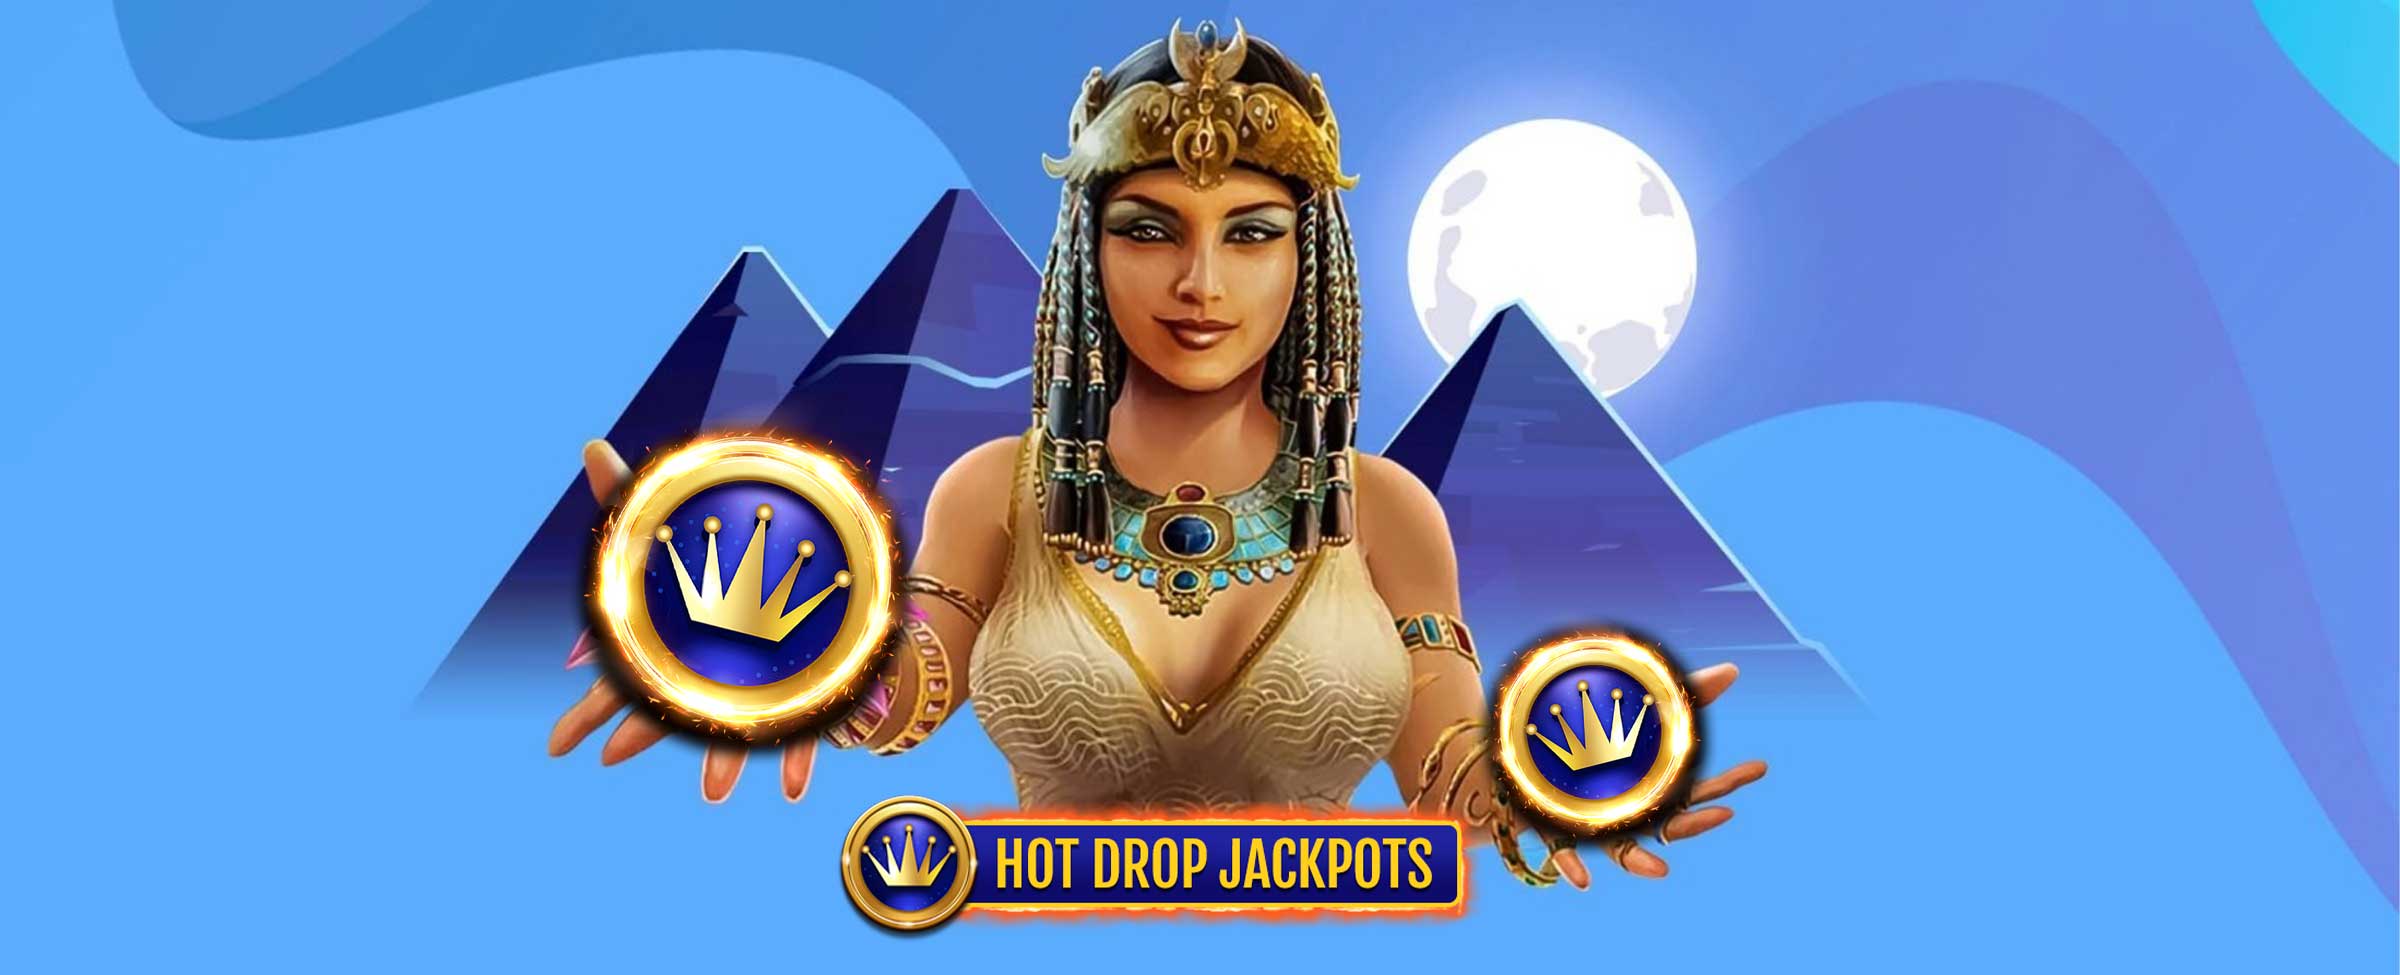 Play A Night With Cleo Hot Drop Jackpots today!